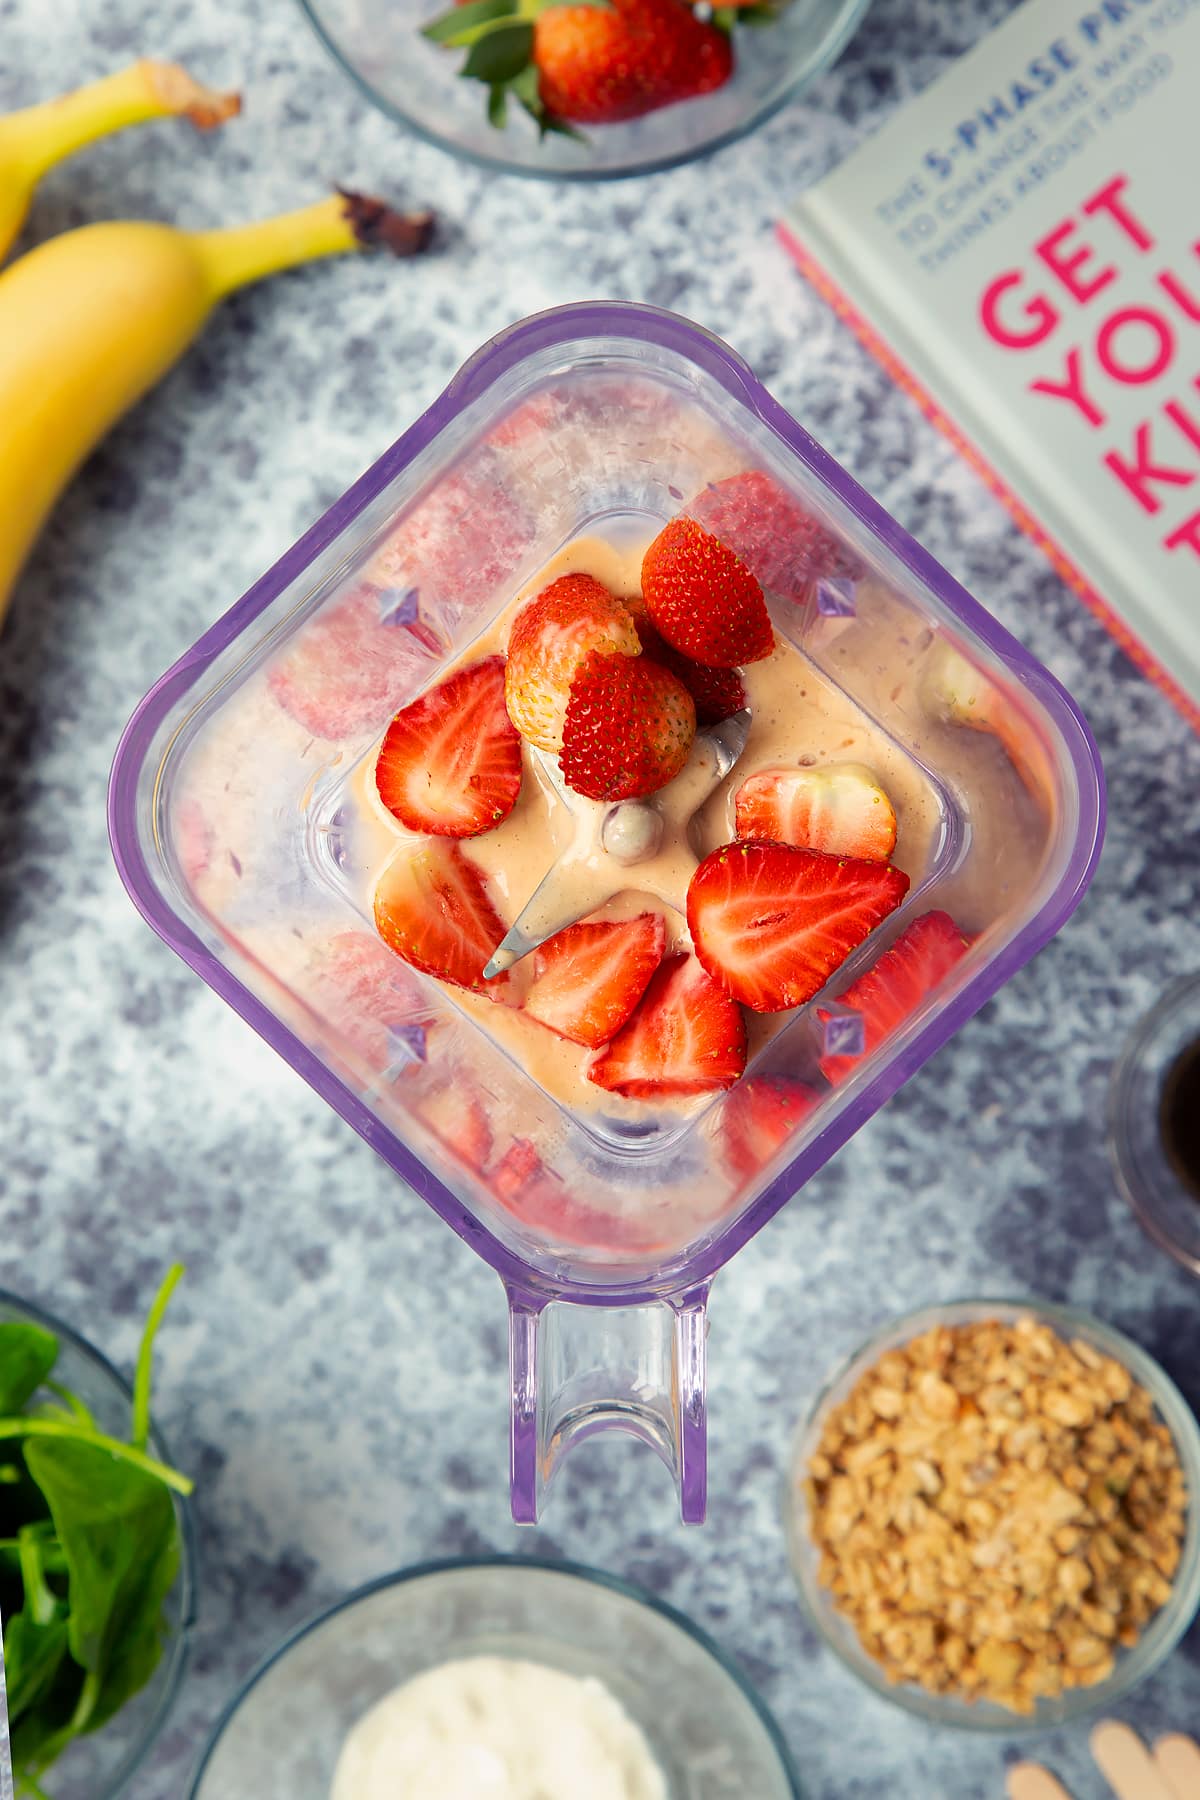 A blender containing banana yogurt mix topped with strawberries. The blender is surrounded by ingredients for fruit and veg lollies.